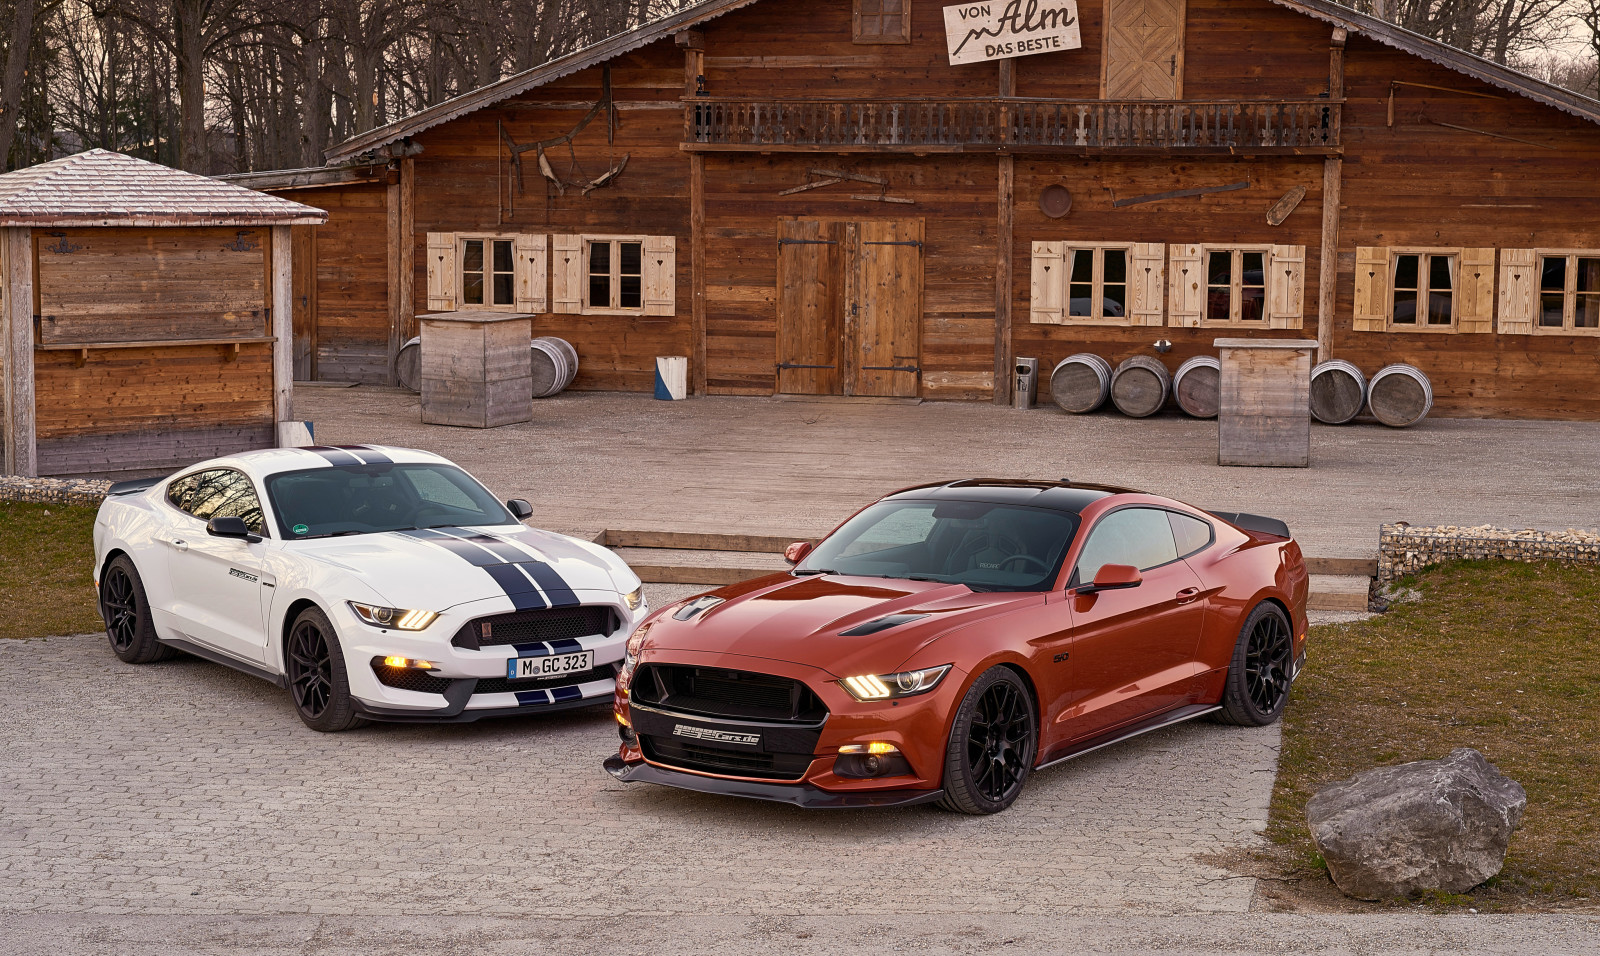 Mustang, Ford, Geiger